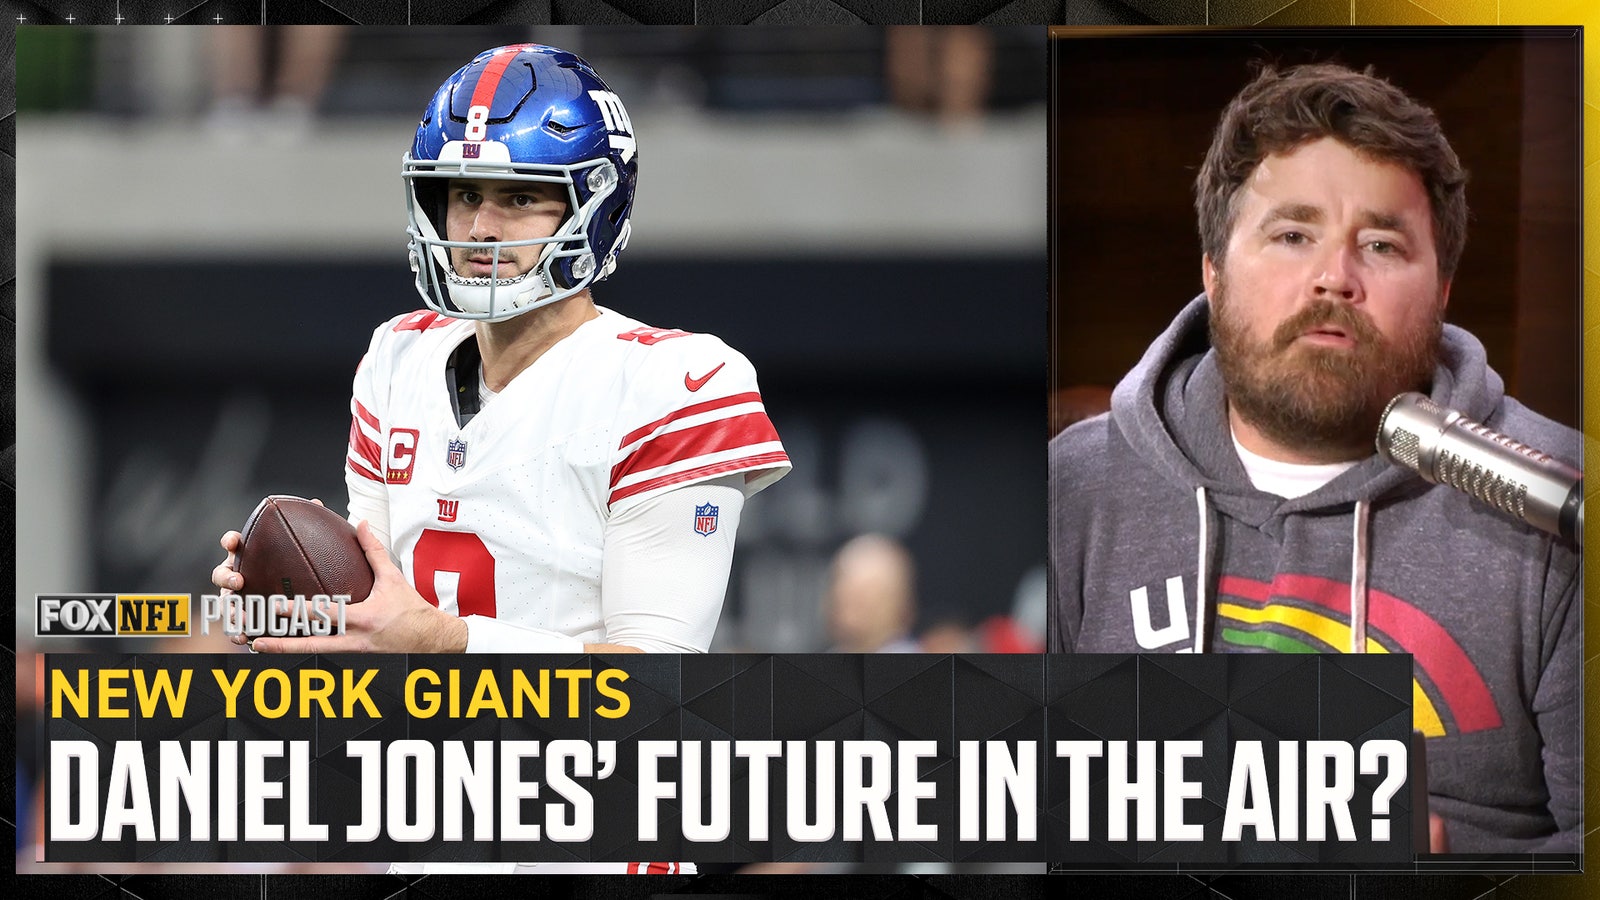 Is Daniel Jones' future with the Giants in jeopardy after torn ACL?